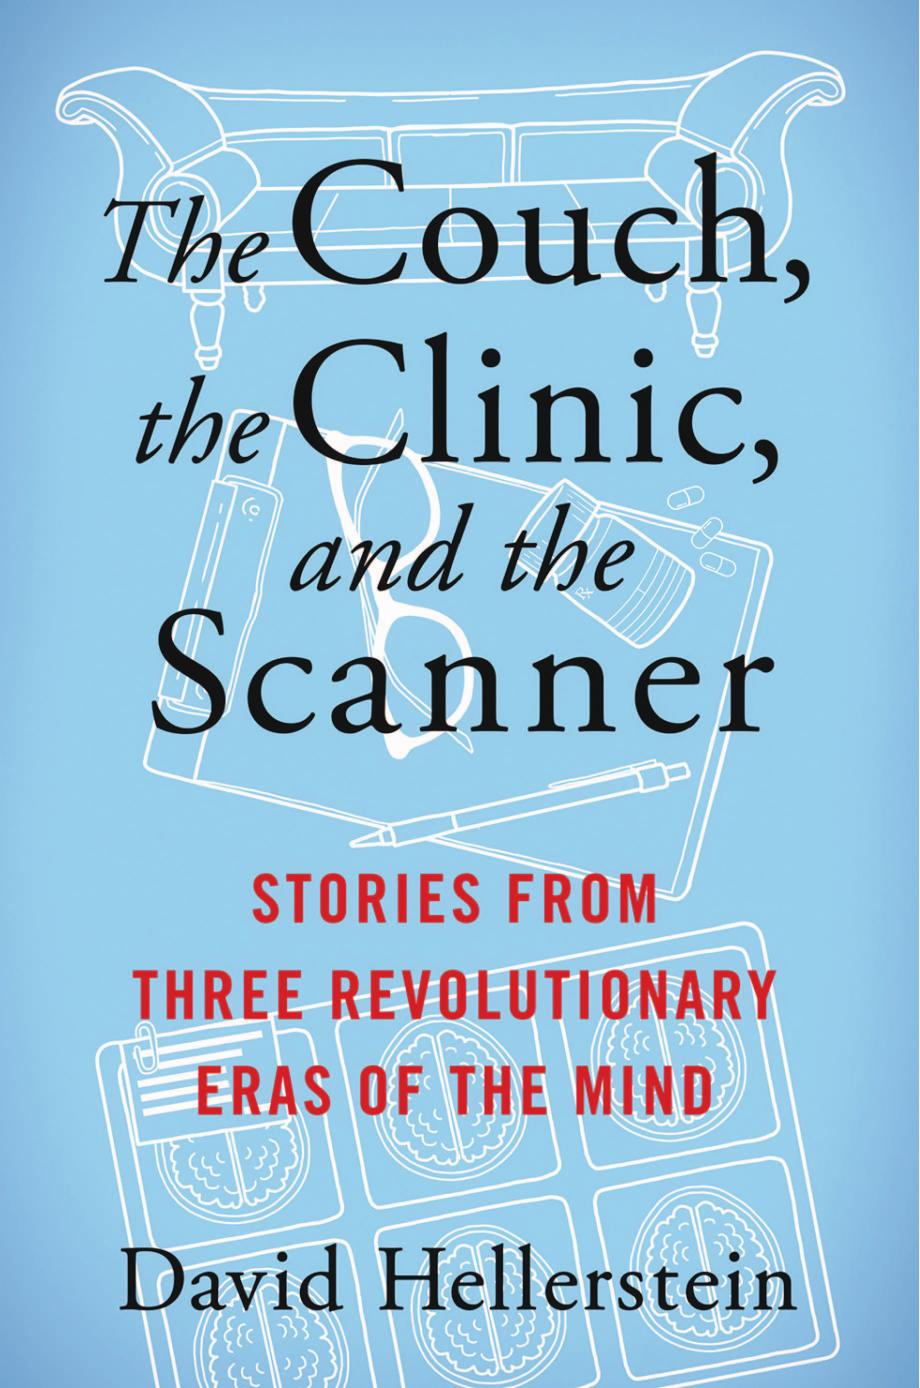 The Couch, the Clinic, and the Scanner: Stories from Three Revolutionary Eras of the Mind by David Hellerstein